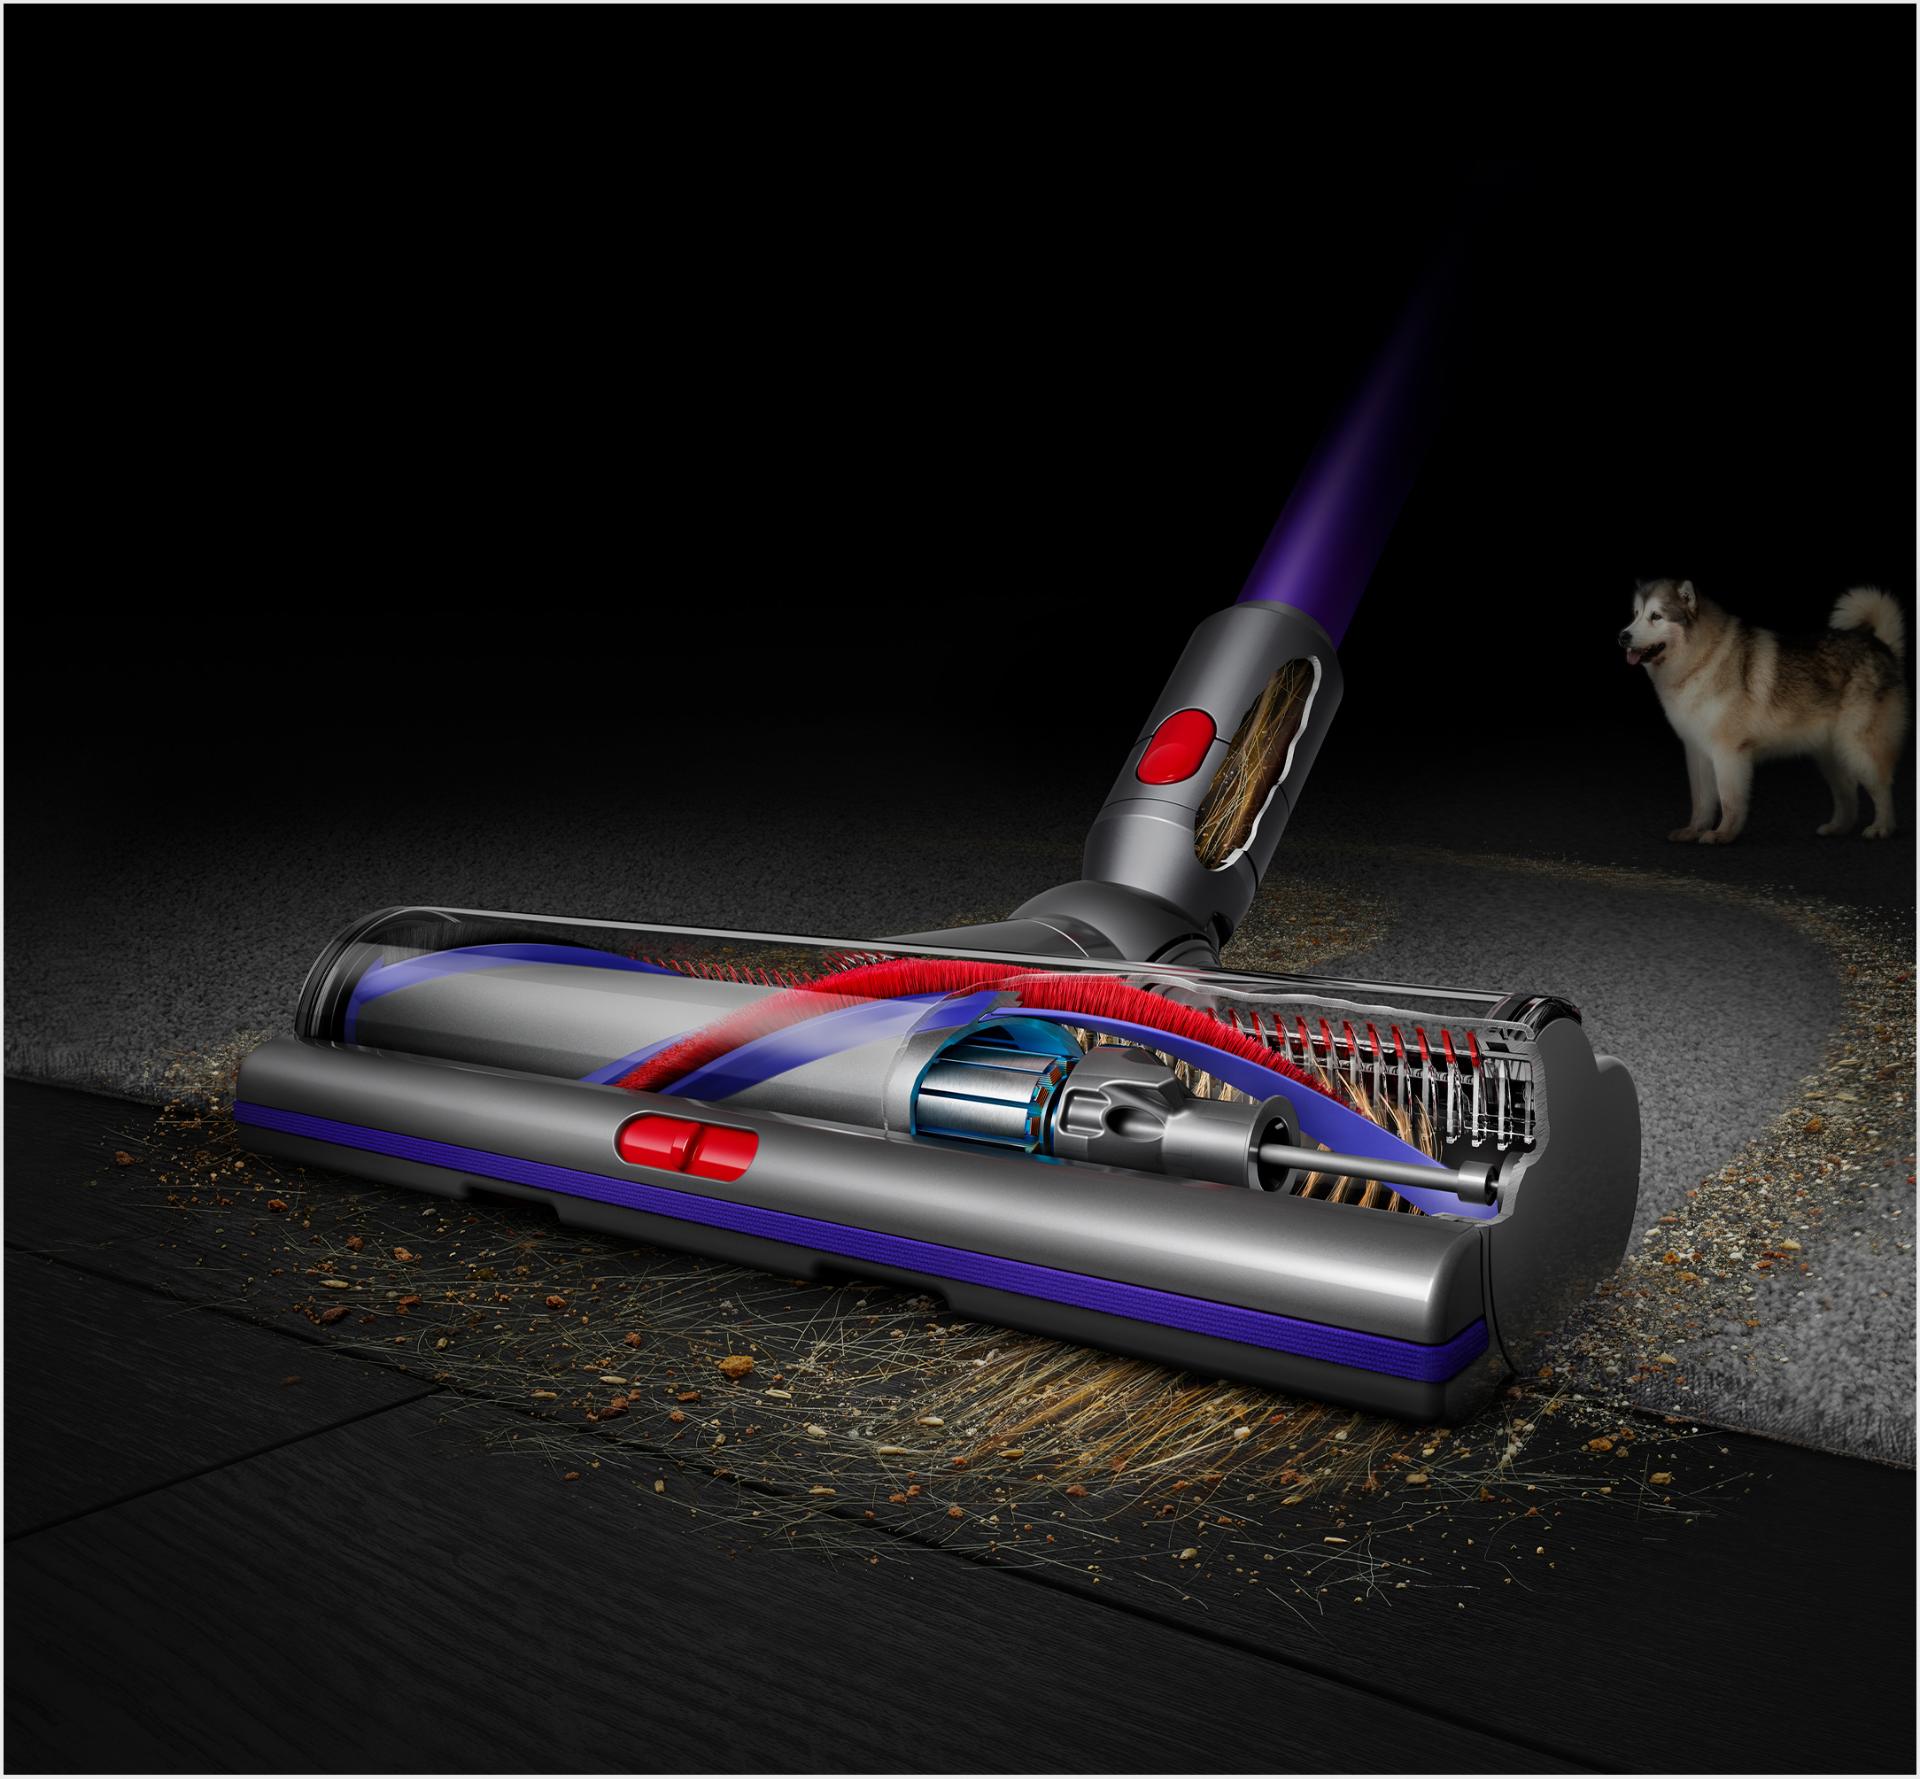 Digital Motorbar™ cleaner head switching from a hard floor to a carpet.